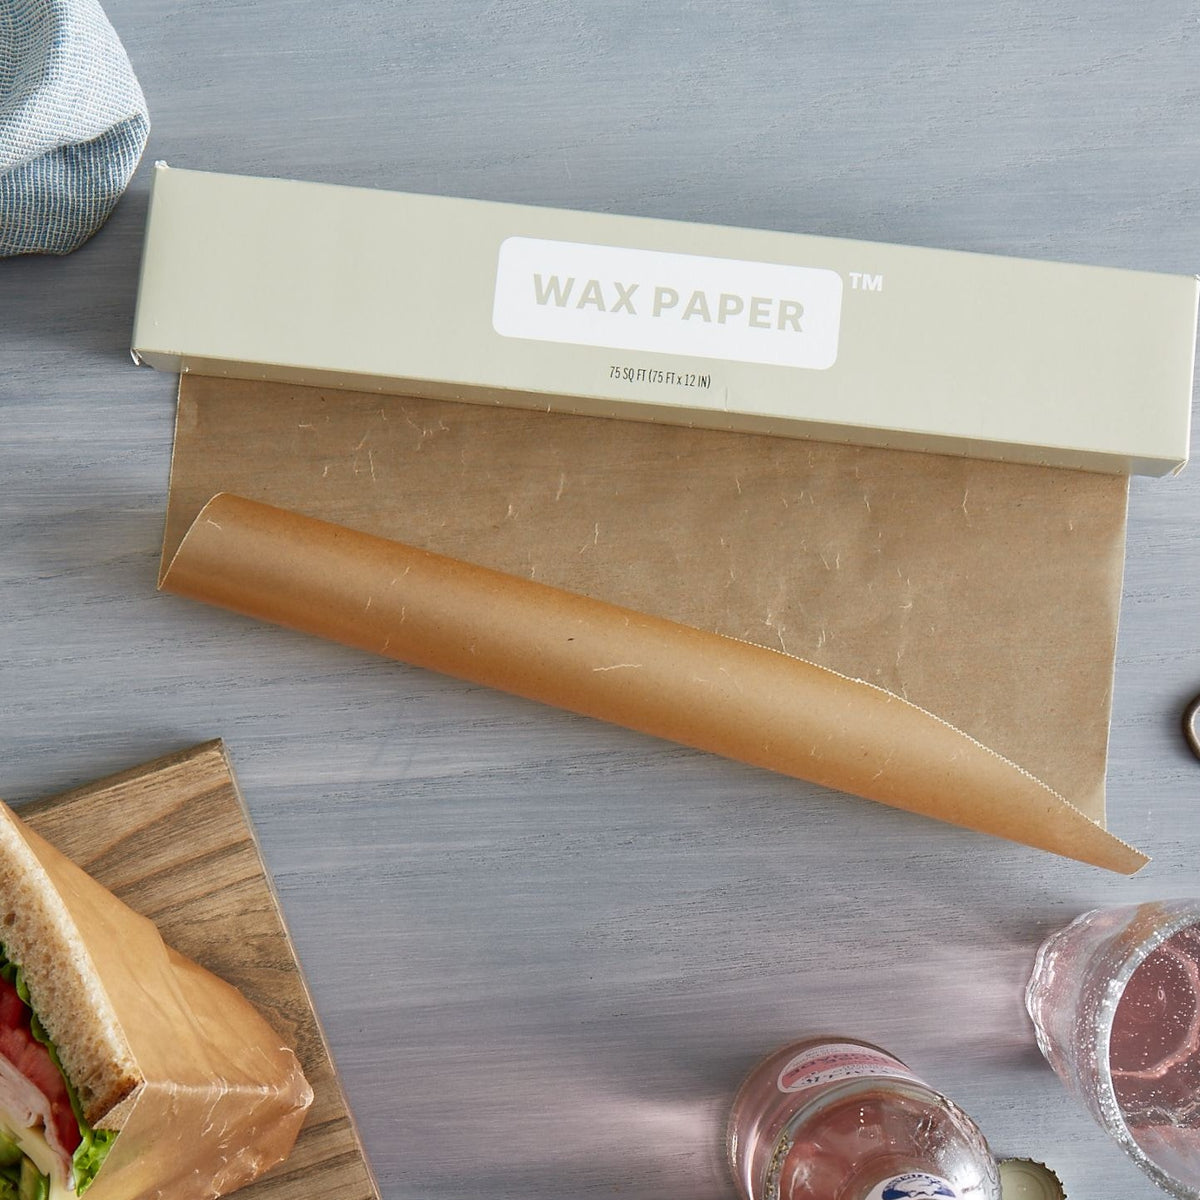 Lifestlye photo of wax paper being unrolled on a kitchen counter next to sandwiches.